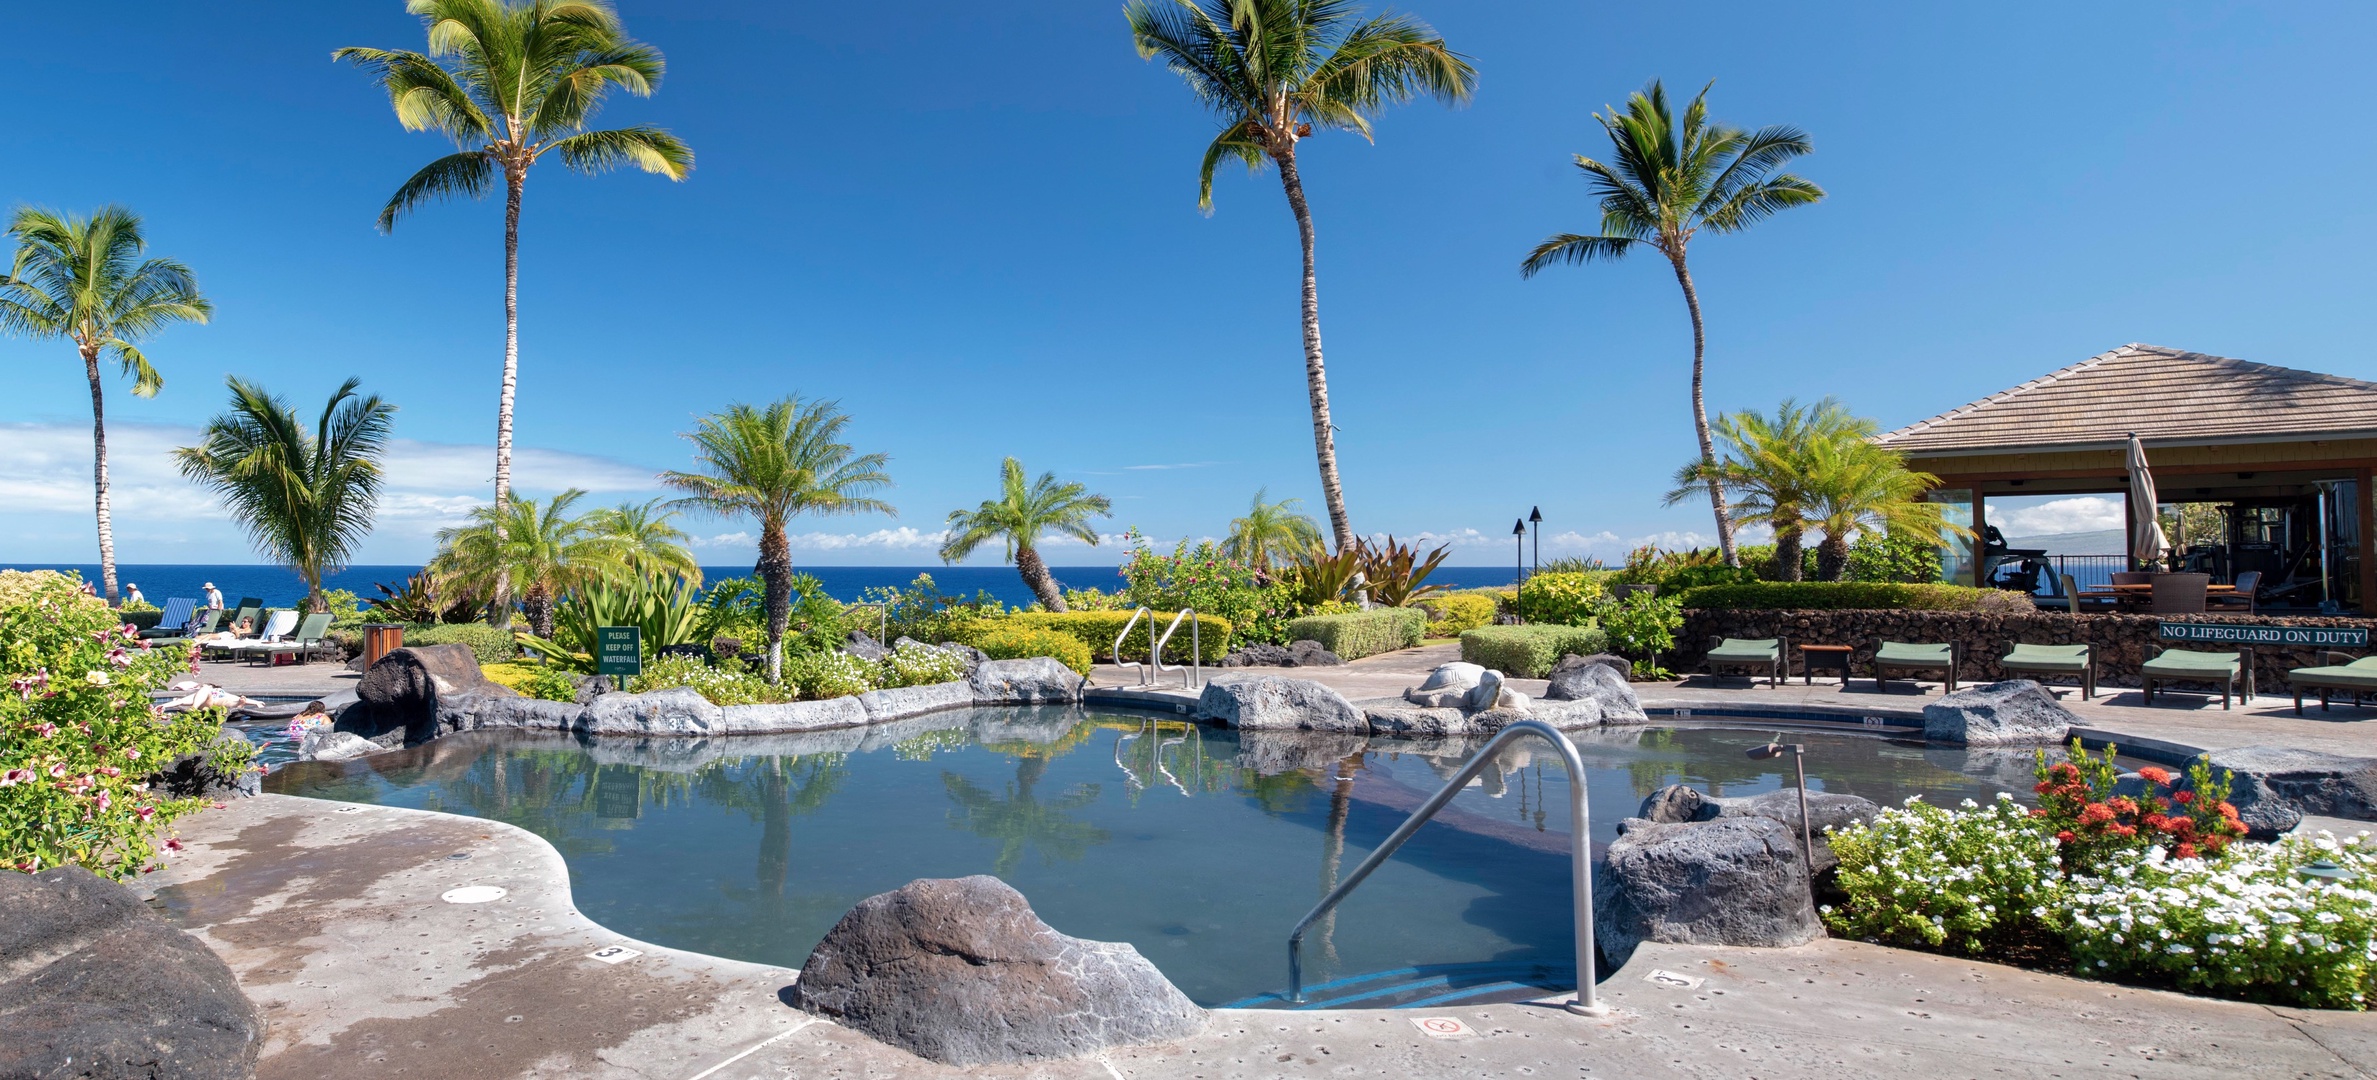 Waikoloa Vacation Rentals, 3BD Hali'i Kai (12G) at Waikoloa Resort - Hali'i Kai Resort's private swimming pool w/ multi levels and depths (fitness center in background)